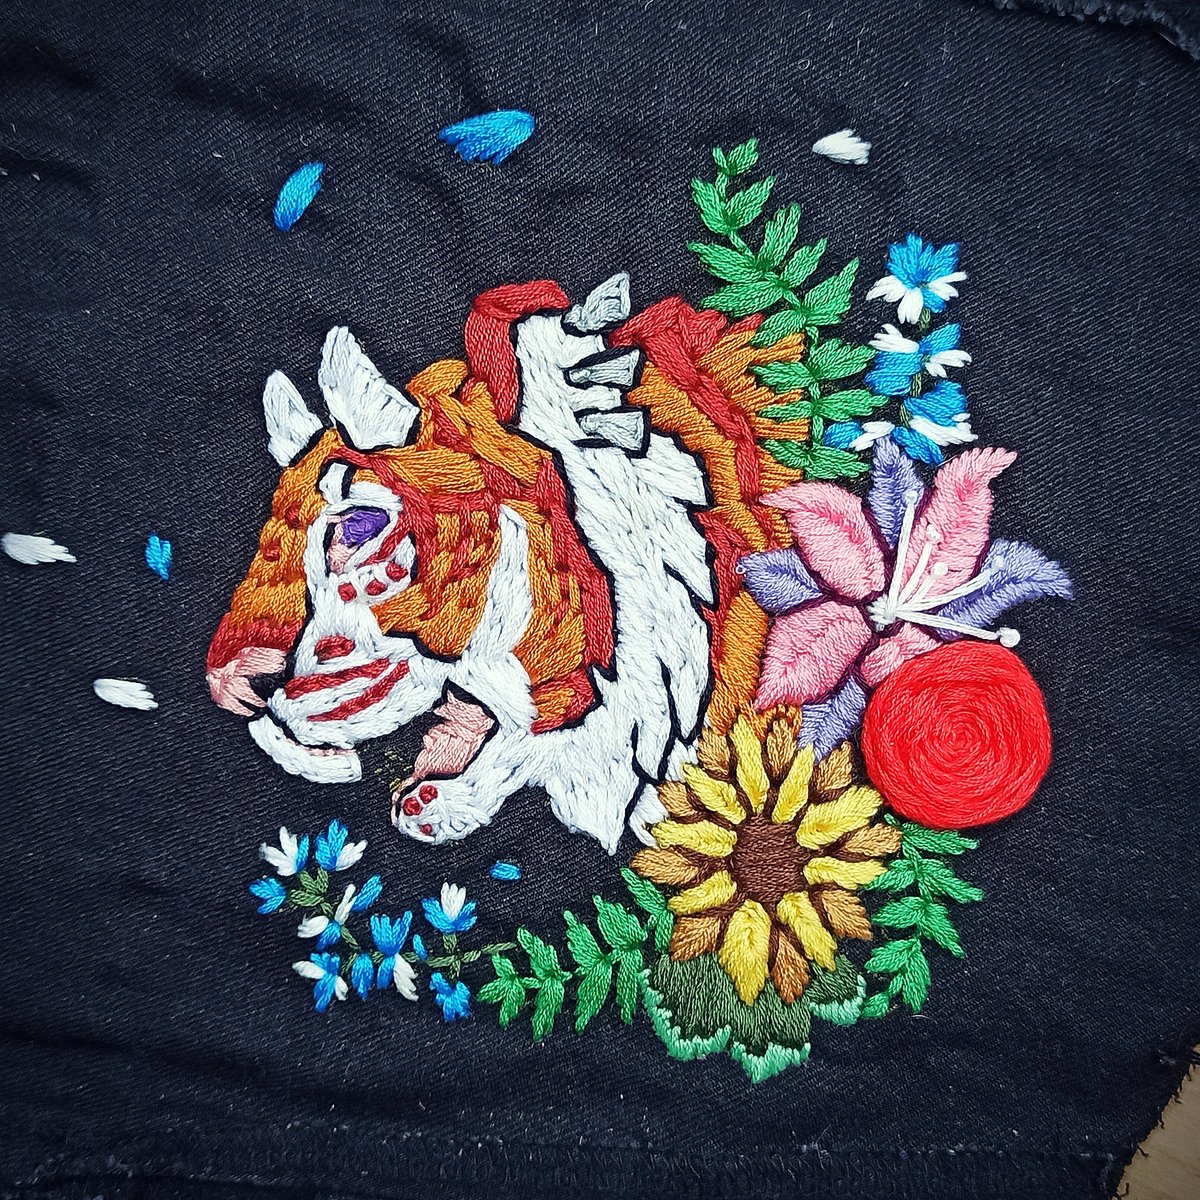 Sth different than usual! Finished this quite a while ago
My first time trying embroidery! Some flowers and my OC Cas. A few mistakes here and there, but I learned a lot while doing this
#embroideryart #ebroidery #embroideryflowers #emrboideryart #tiger #handembroidery #artwork